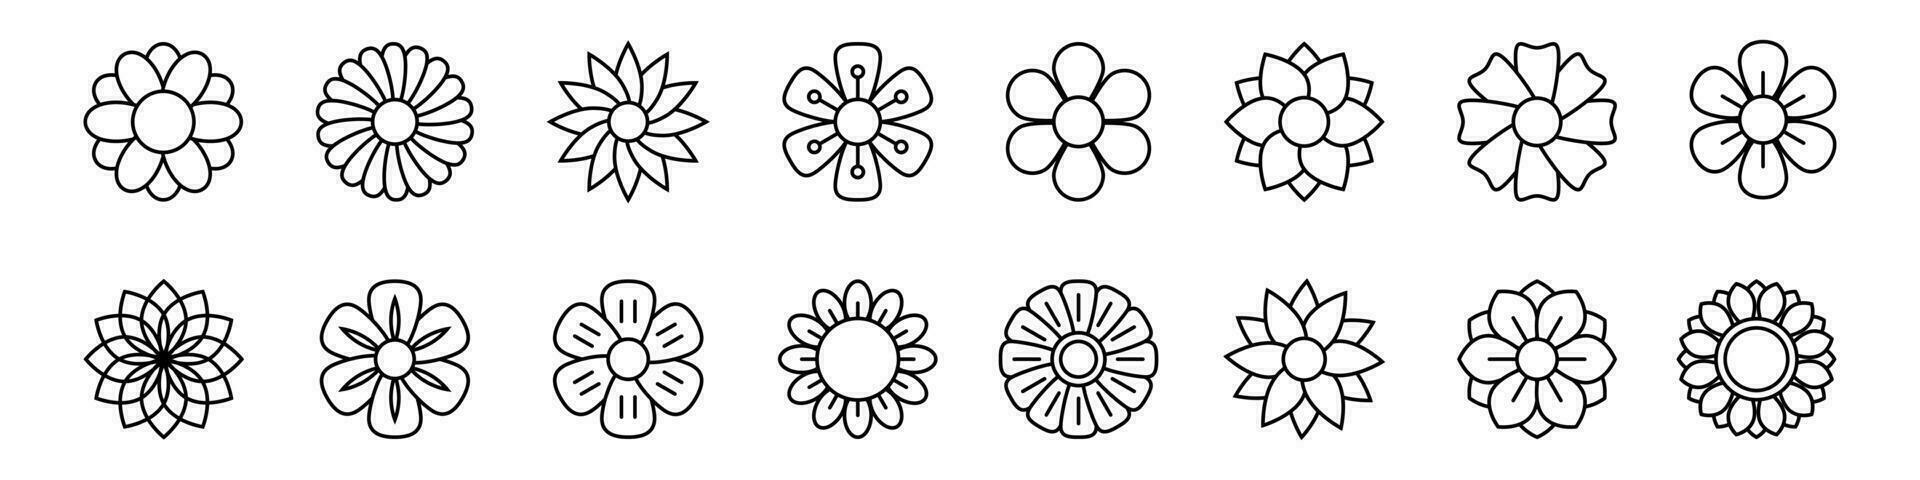 Flower icon set, vector line icon isolated.